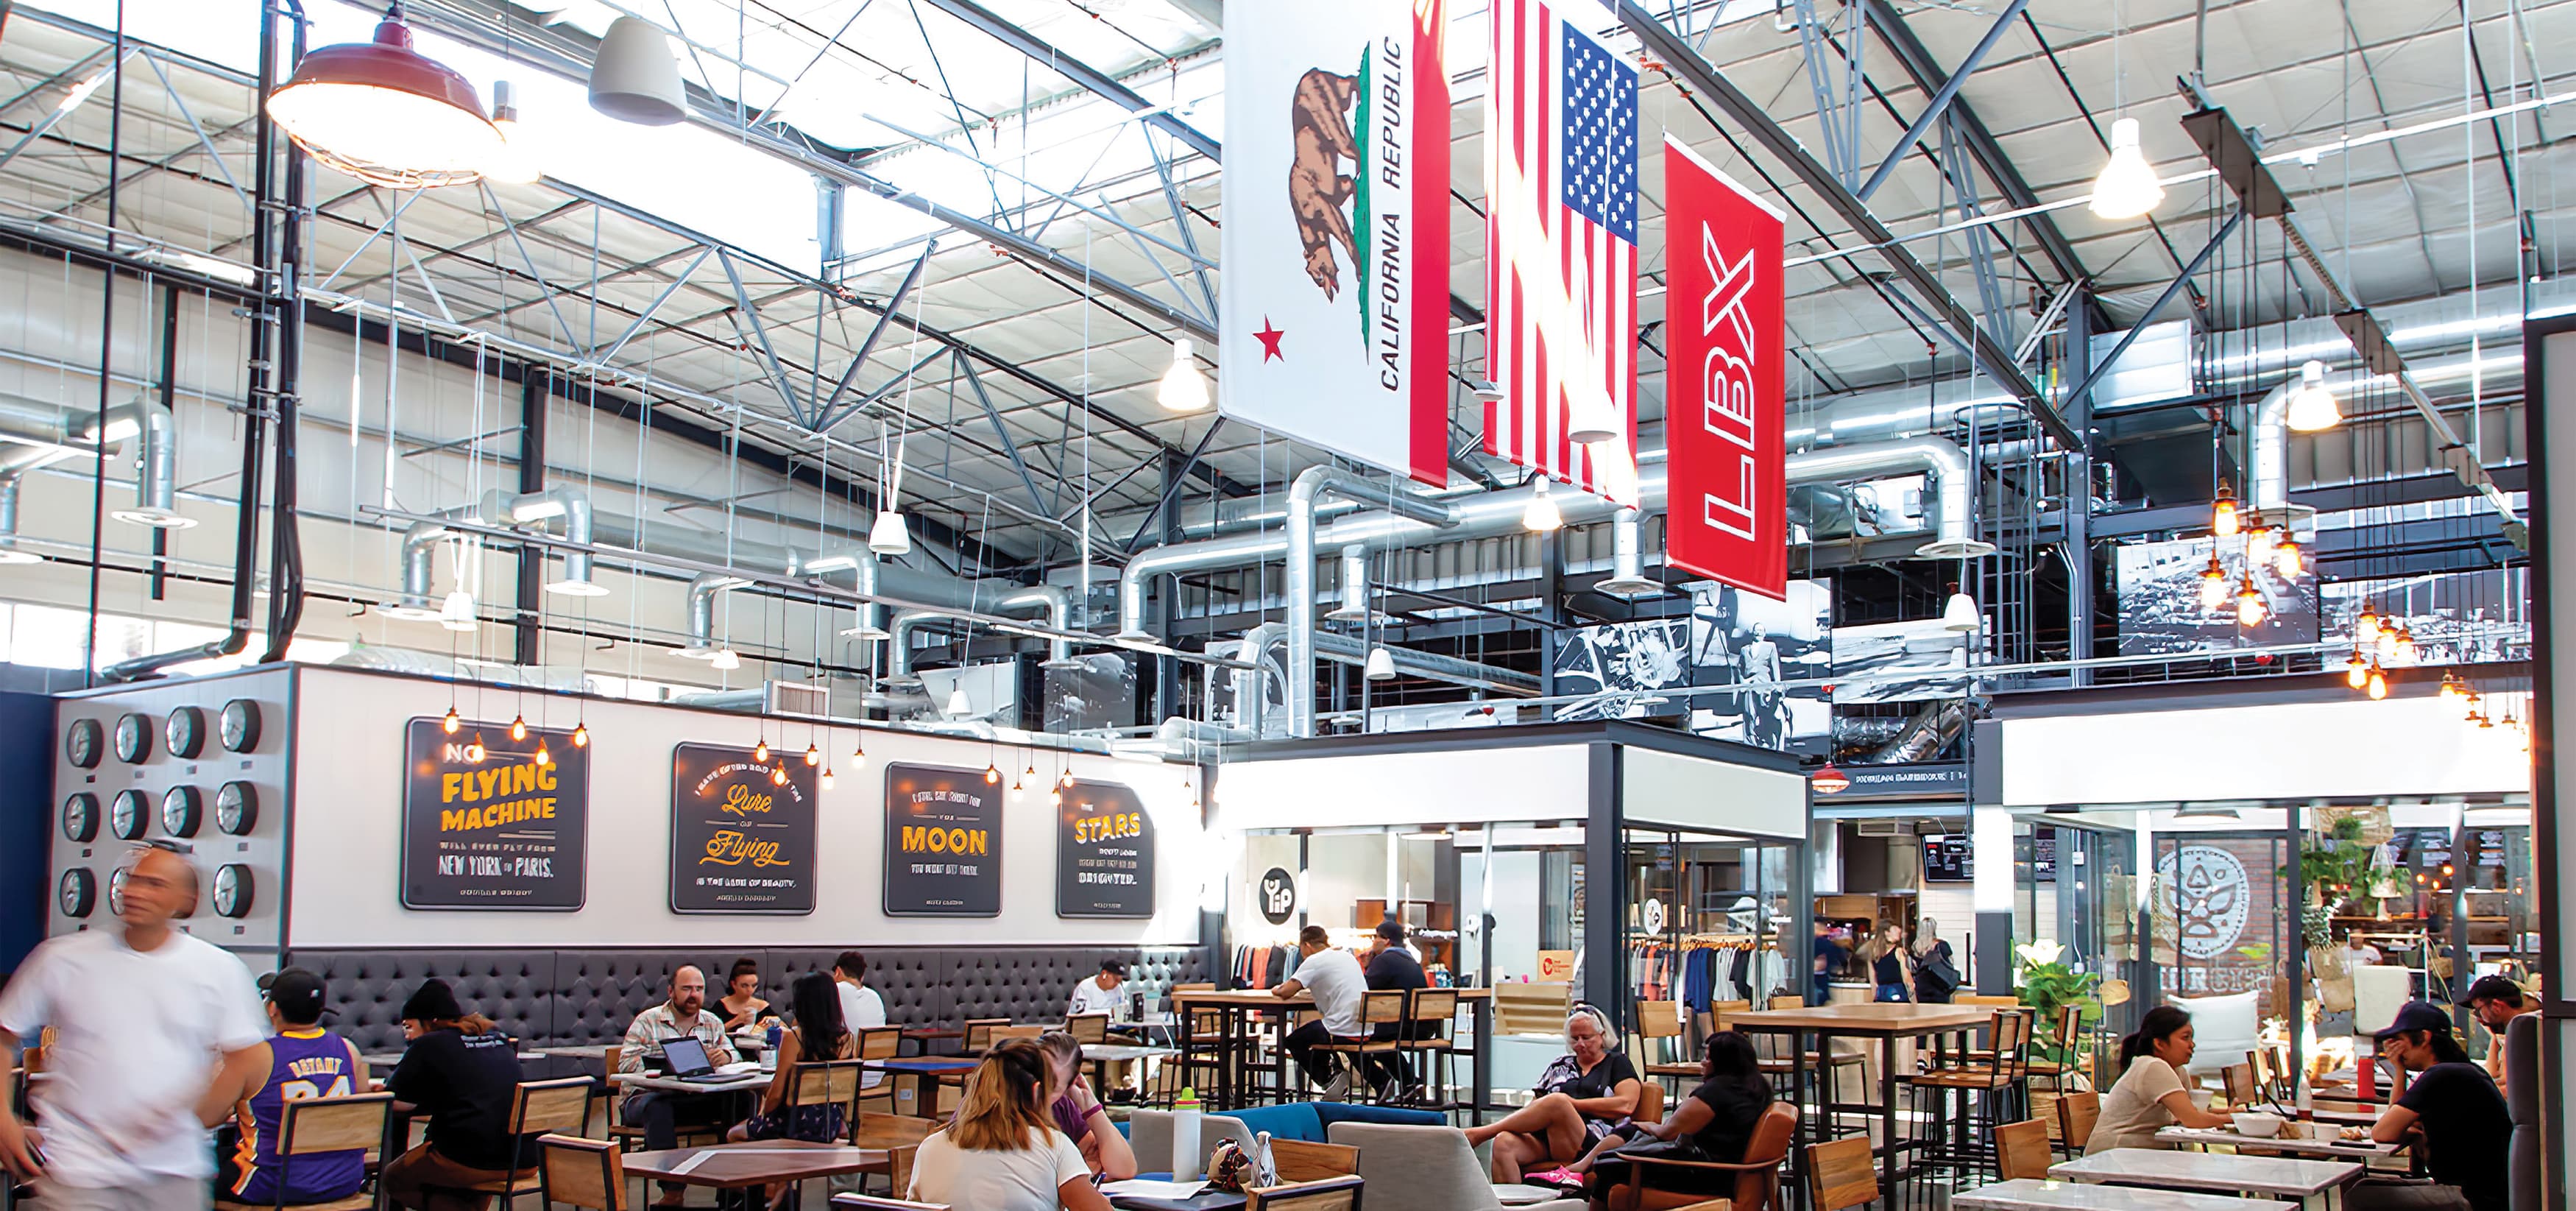 The Hangar, a food hall dining complex at Long Beach Exchange. Environmental Graphic Design.